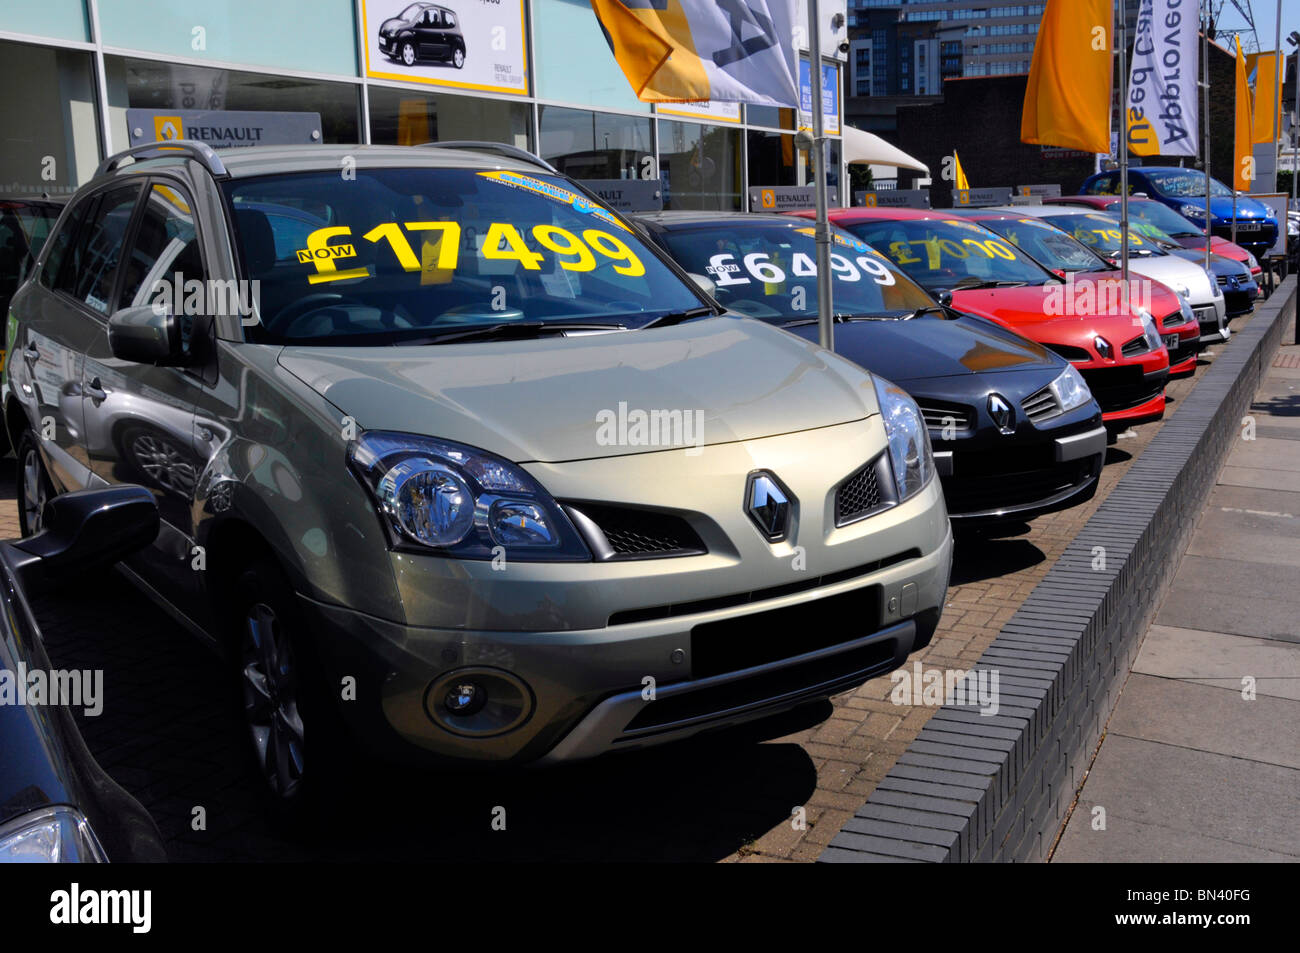 Row of second hand used cars outside Renault car dealer on a pavement forecourt displaying prices of each vehicle Ilford East London England UK Stock Photo